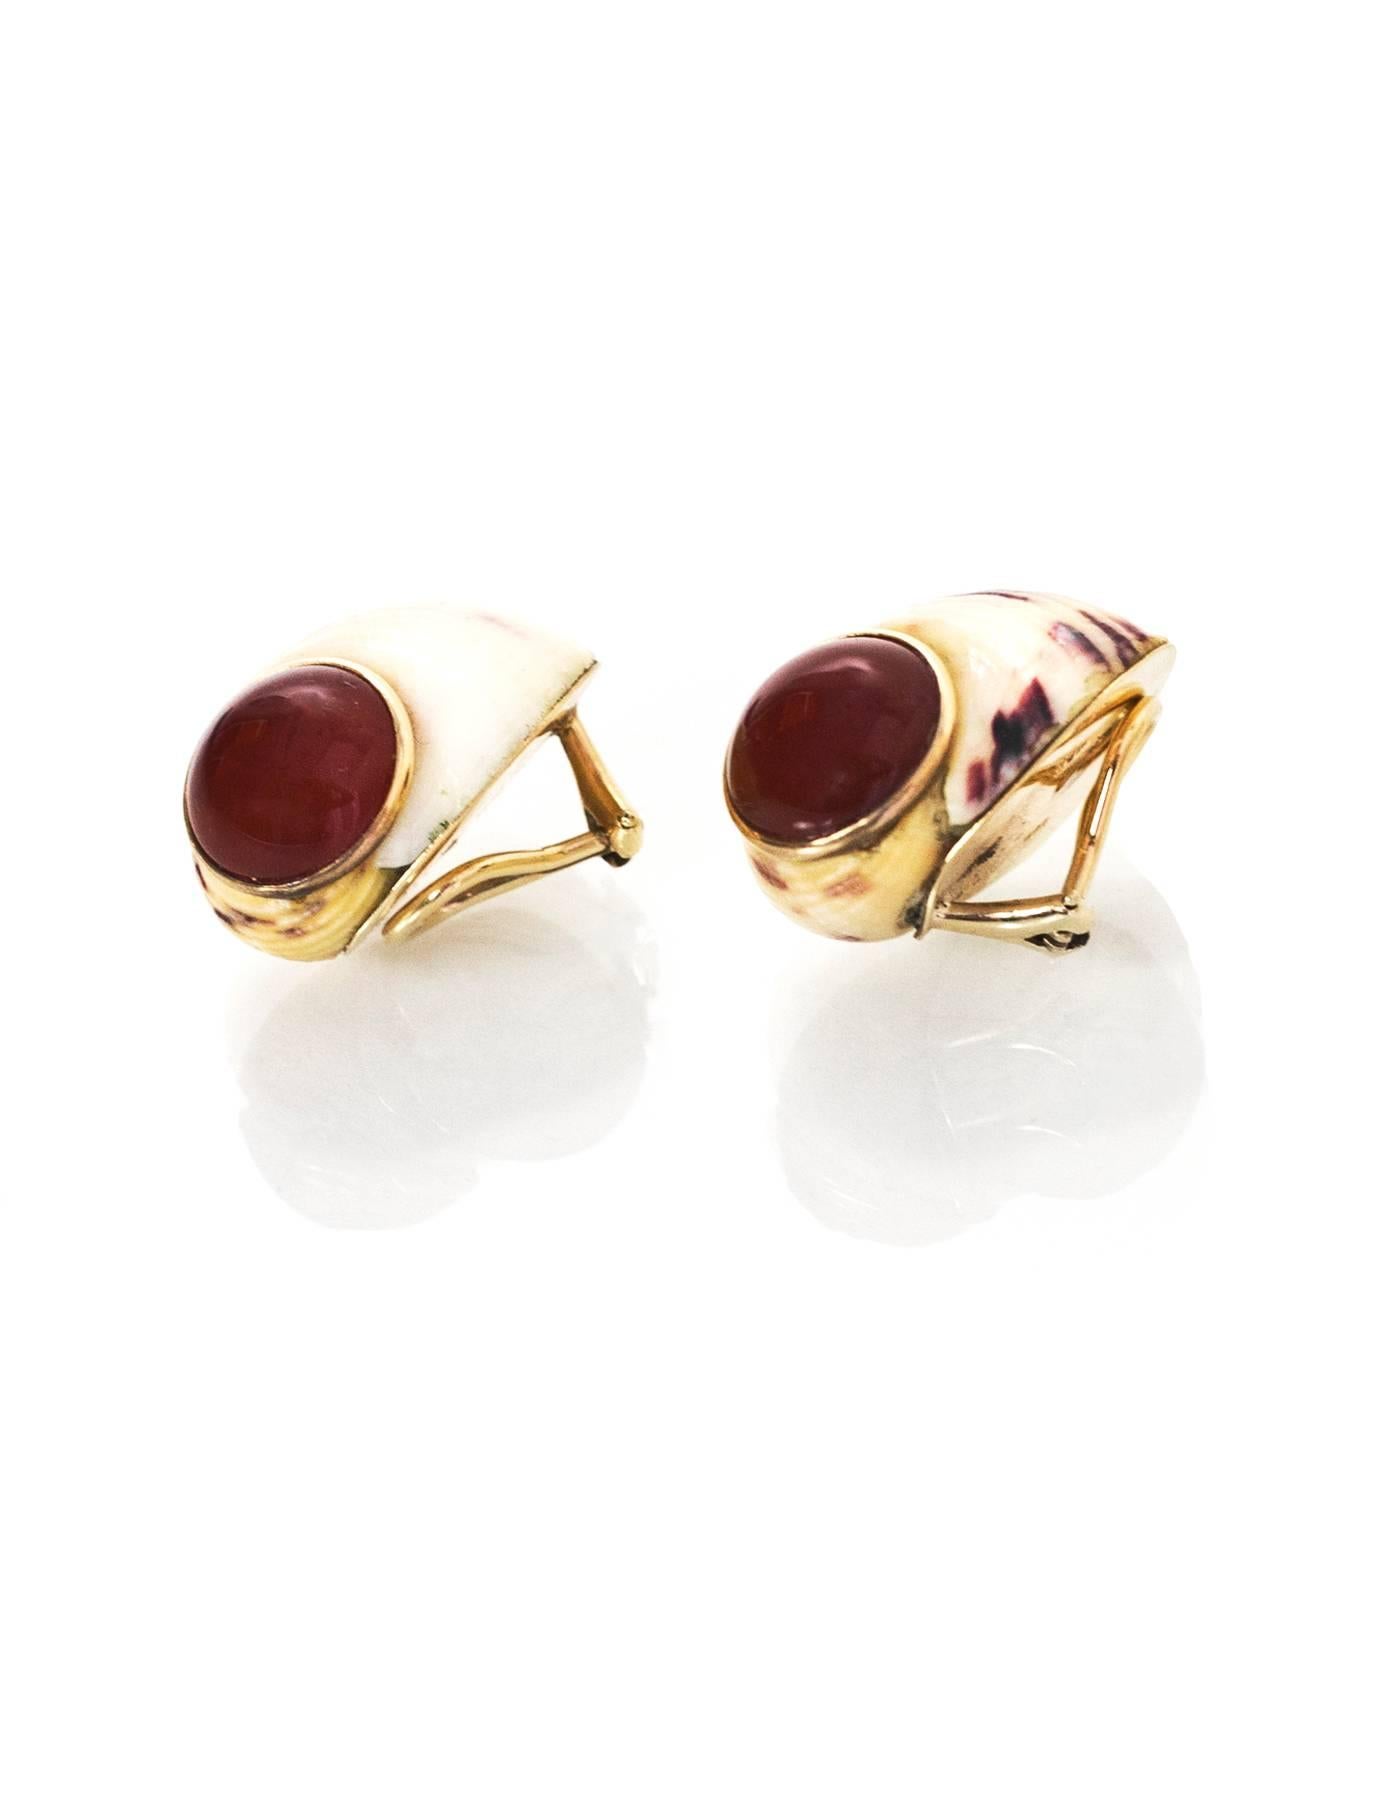 Maz 14k Gold & Carnelian Stone Snail Clip-On Earrings

Color: Ivory, brown
Materials: 14k Gold, carnelian stone
Closure: Clip-on
Stamp: Maz 14k
Overall Condition: Excellent pre-owned condition, minor surface marks
Measurements: 
Length: 1"